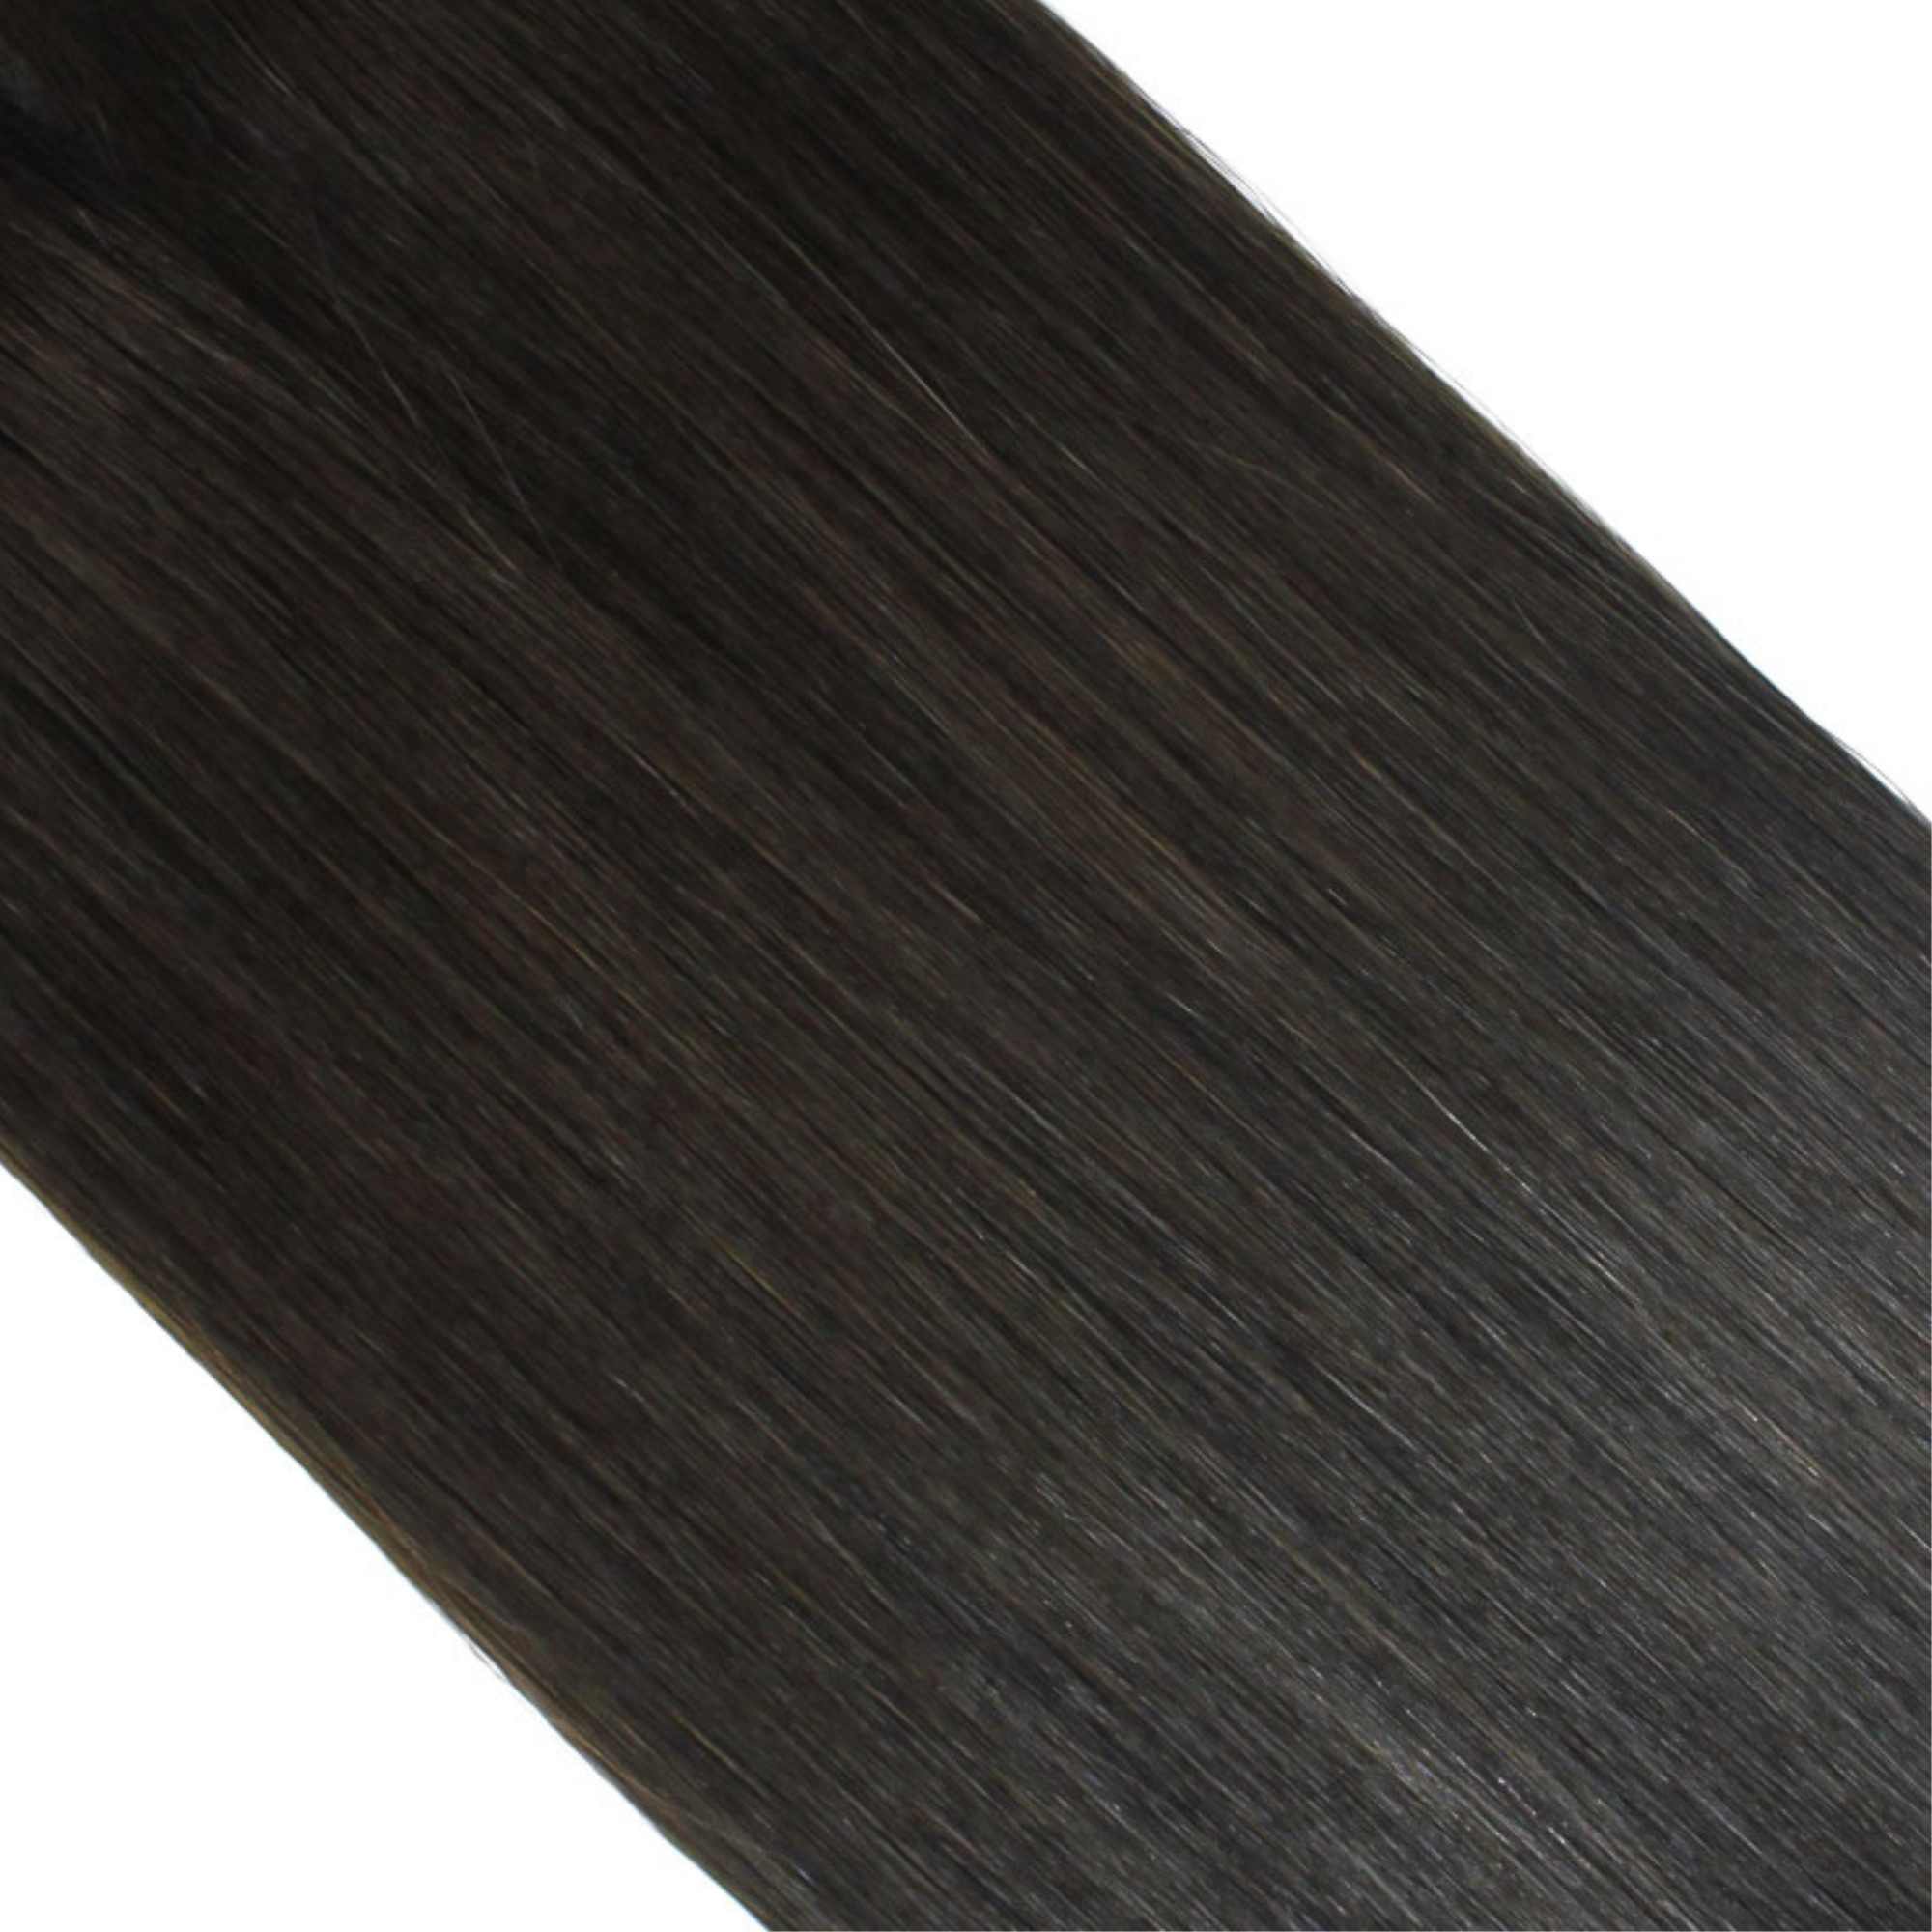 "hair rehab london 18" weft hair extensions shade swatch titled show stopper"